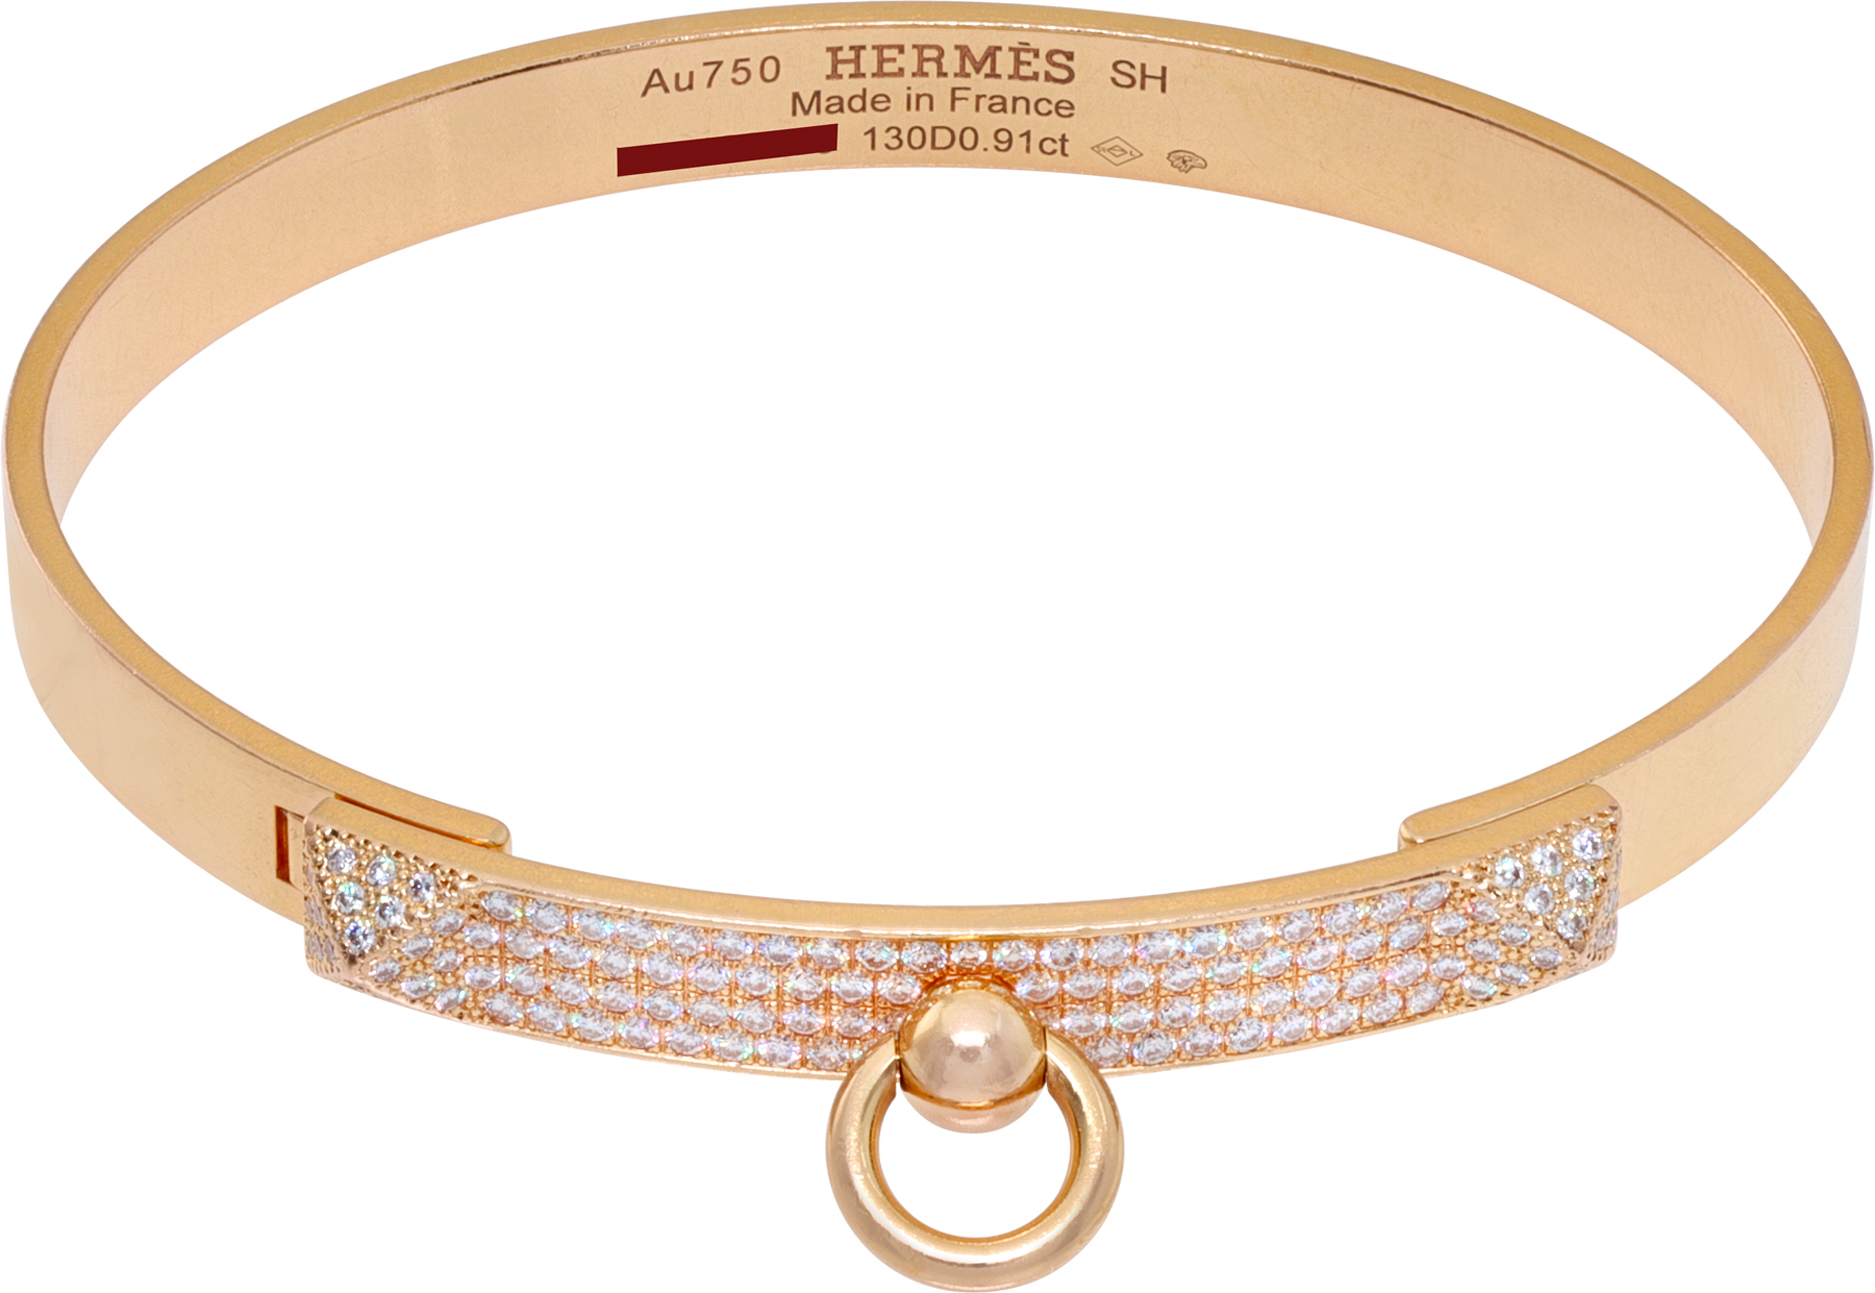 Hermes Collier de Chien collection, bangle bracelet in 18k rose gold with diamonds